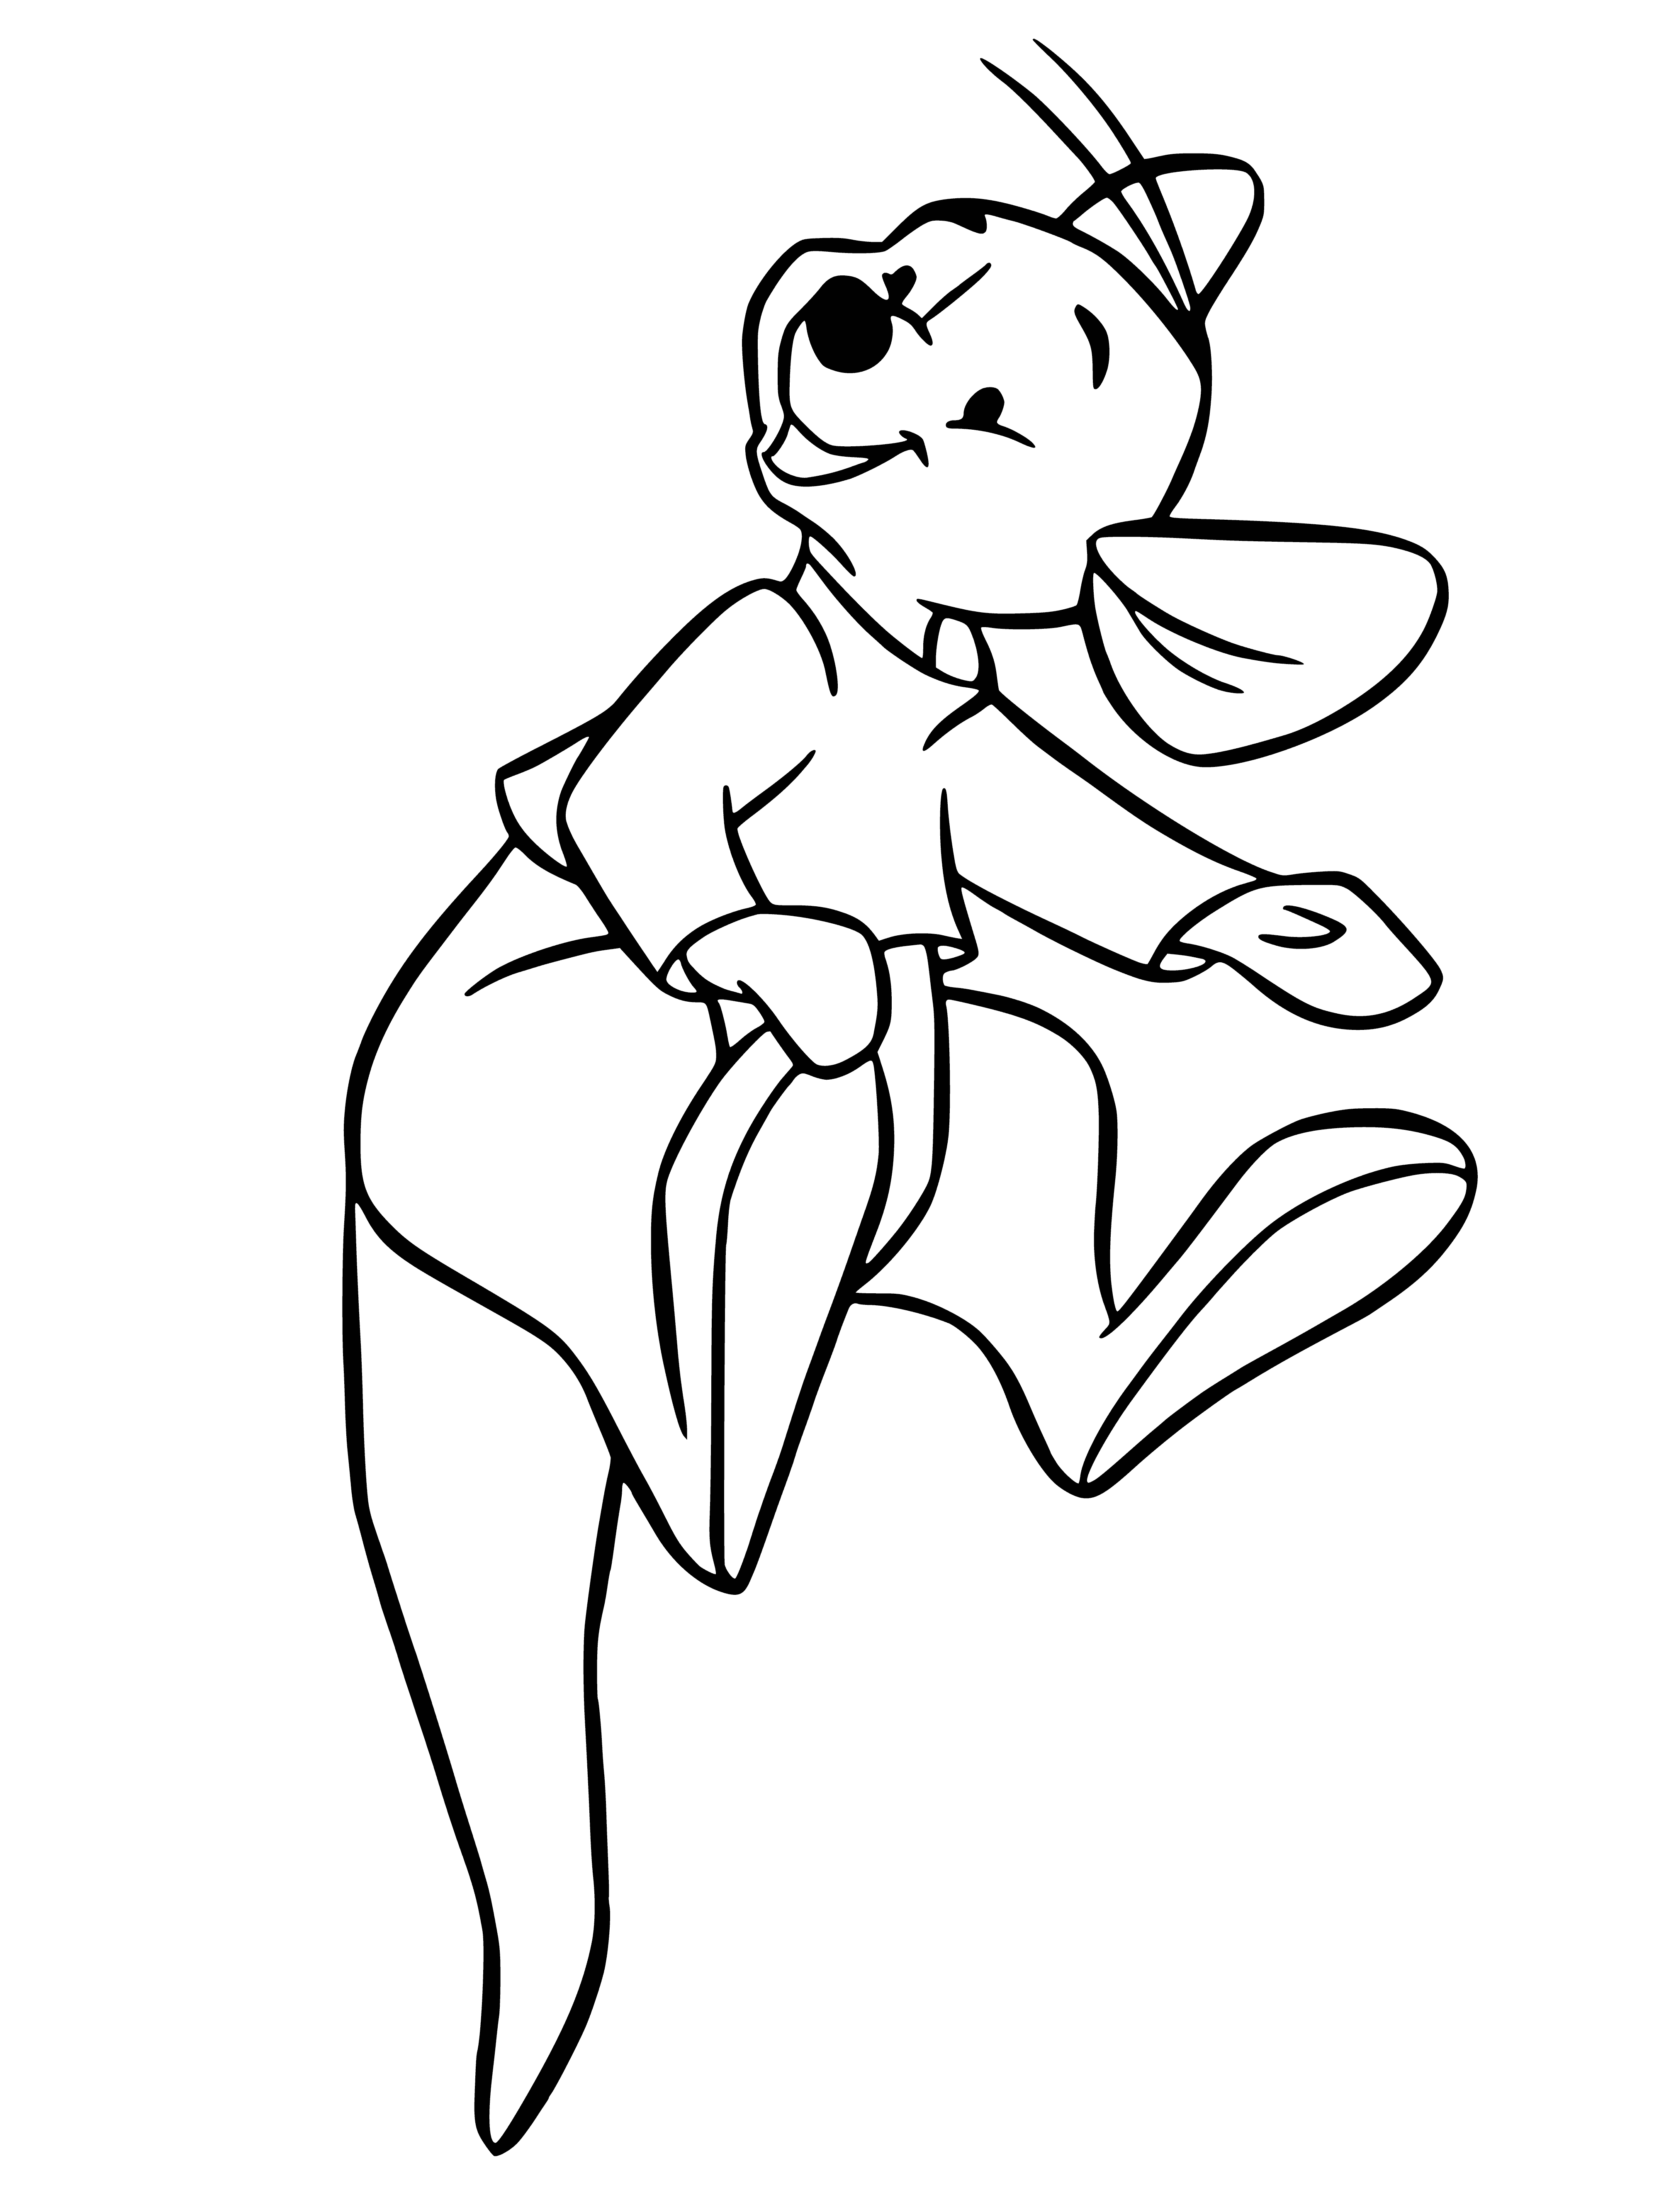 coloring page: Winnie the Pooh figure stands center with arms outspread, holding two honey pots, red shirt & red pants reads "Kid Ru" above. #WinnieThePooh